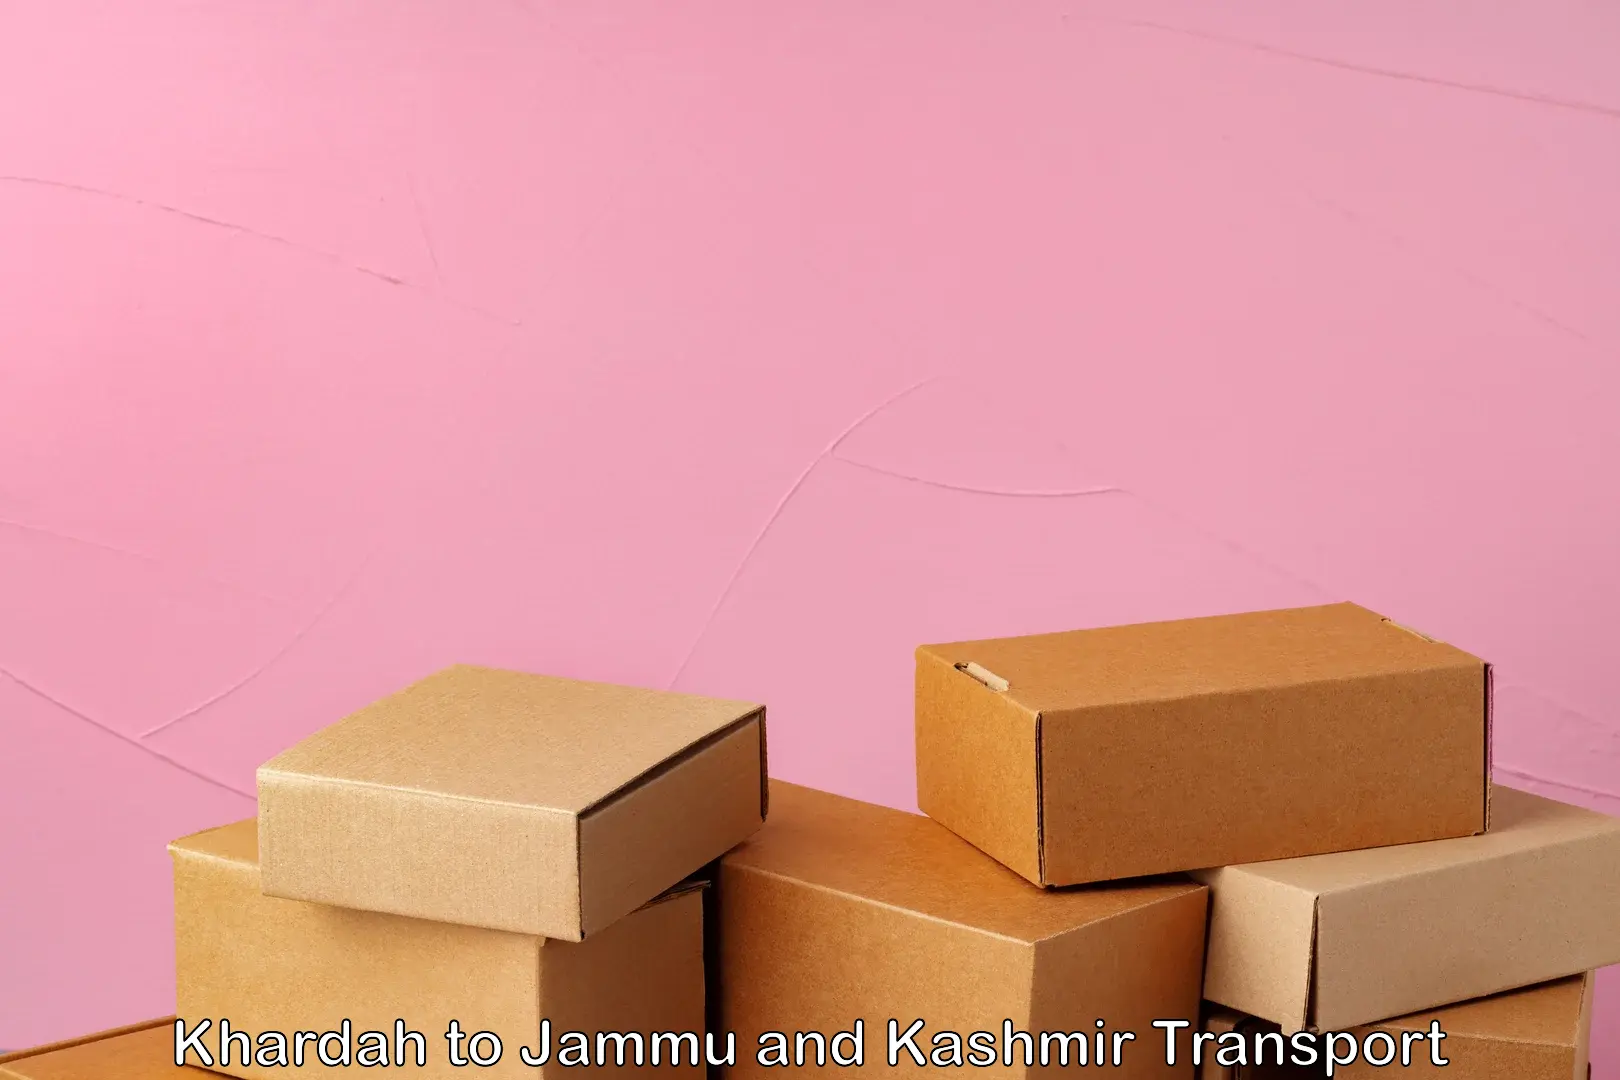 Cargo train transport services in Khardah to Jammu and Kashmir